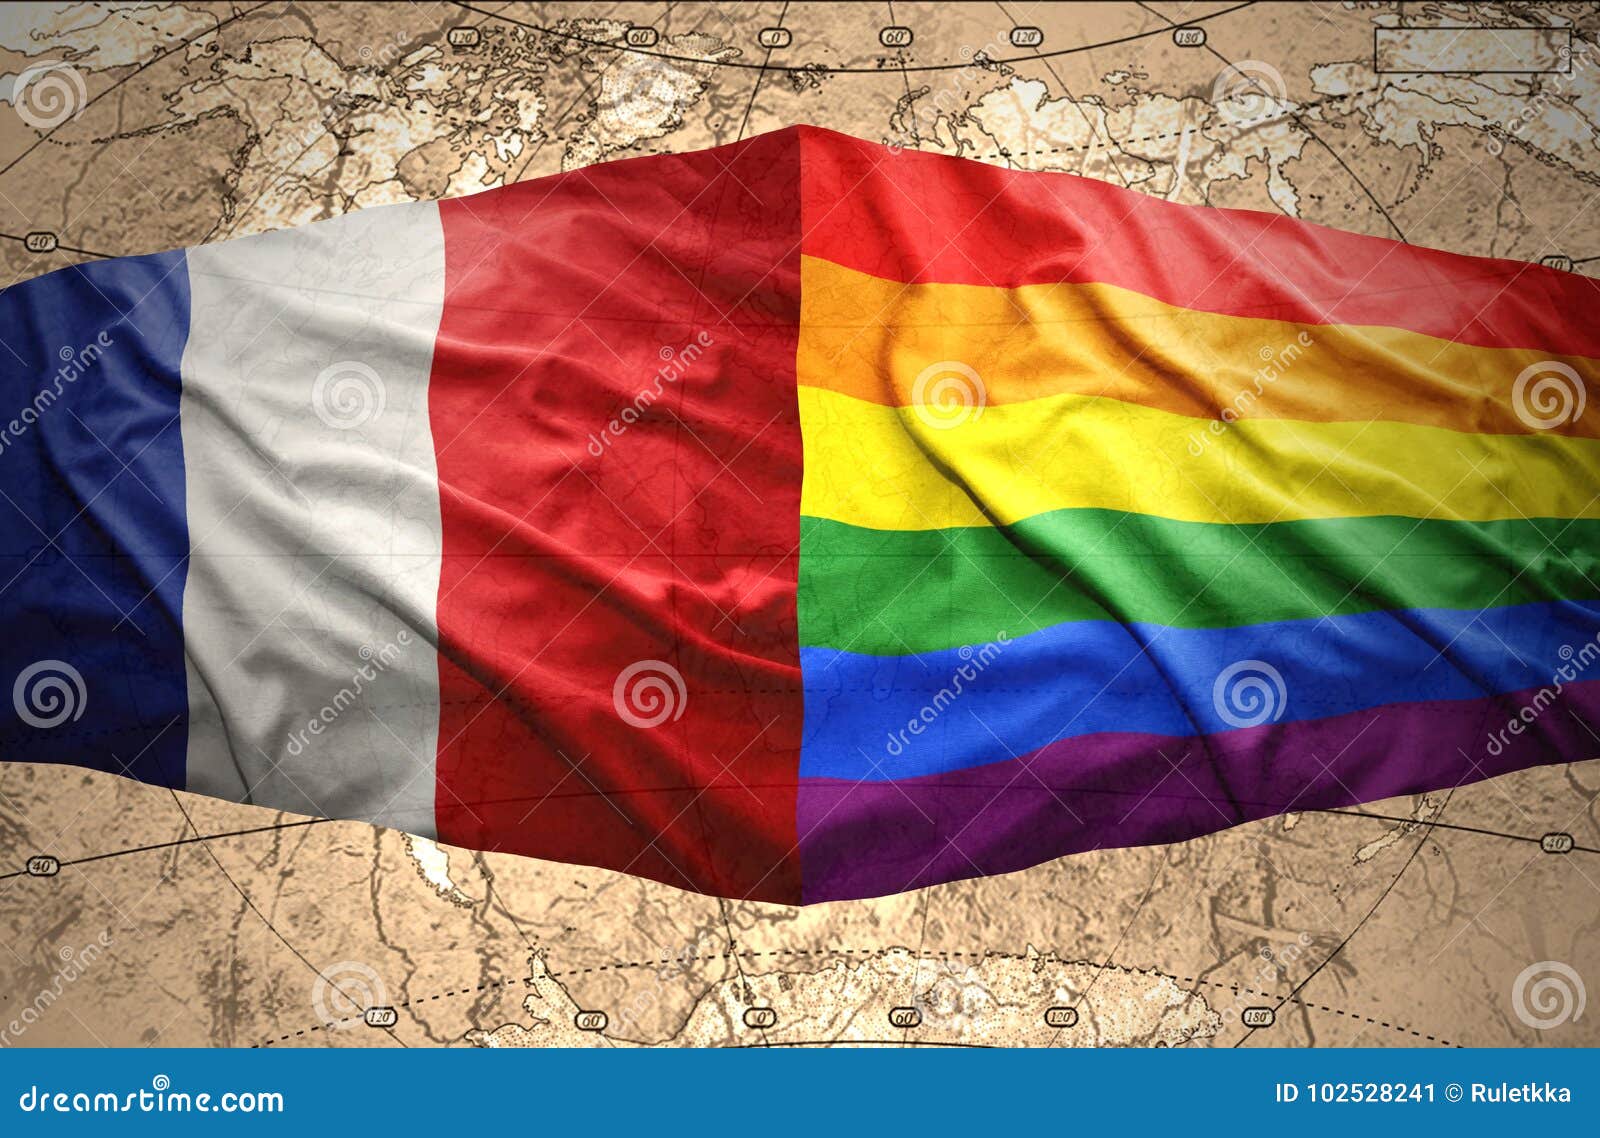 French and Rainbow flags stock illustration. Illustration of couple ...